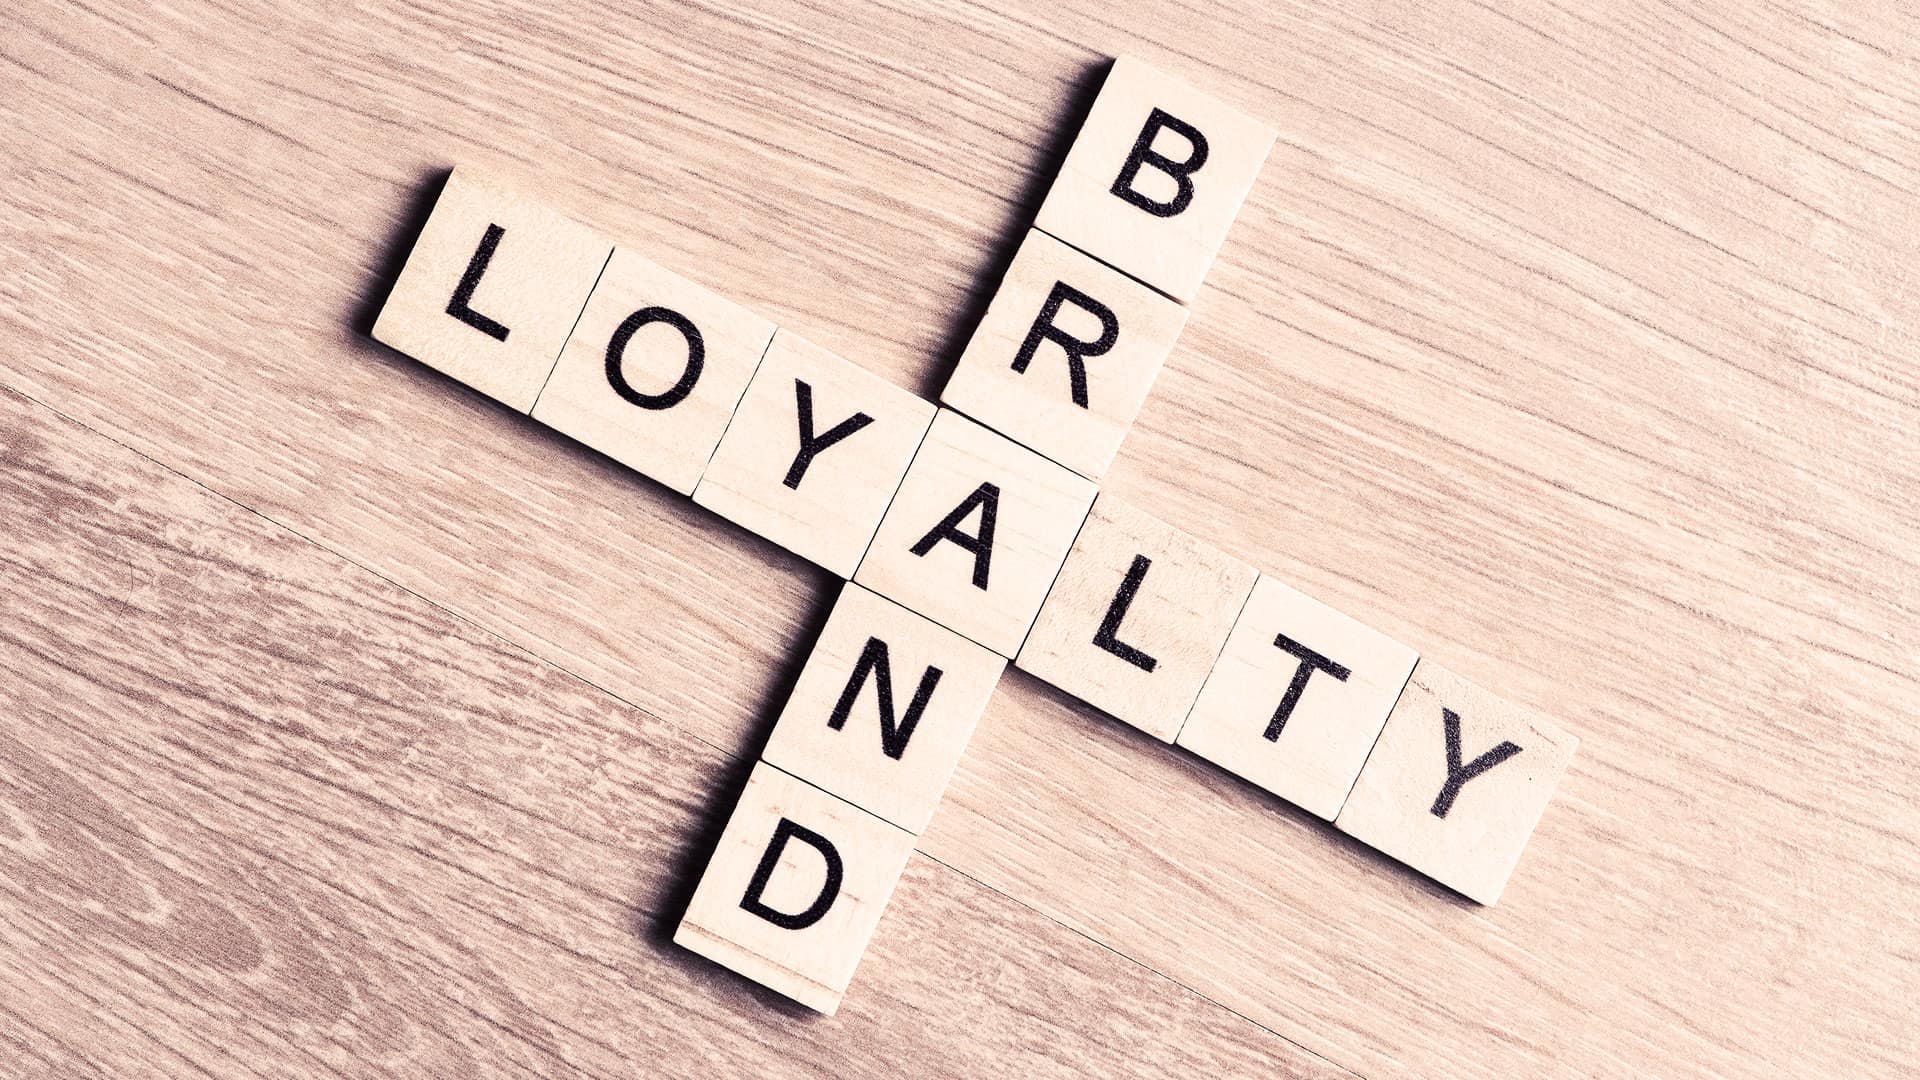 Cultivating Loyalty Is More Challenging Than Ever: Here’s What Customers Want And Brands Should Know, According To The Latest Data